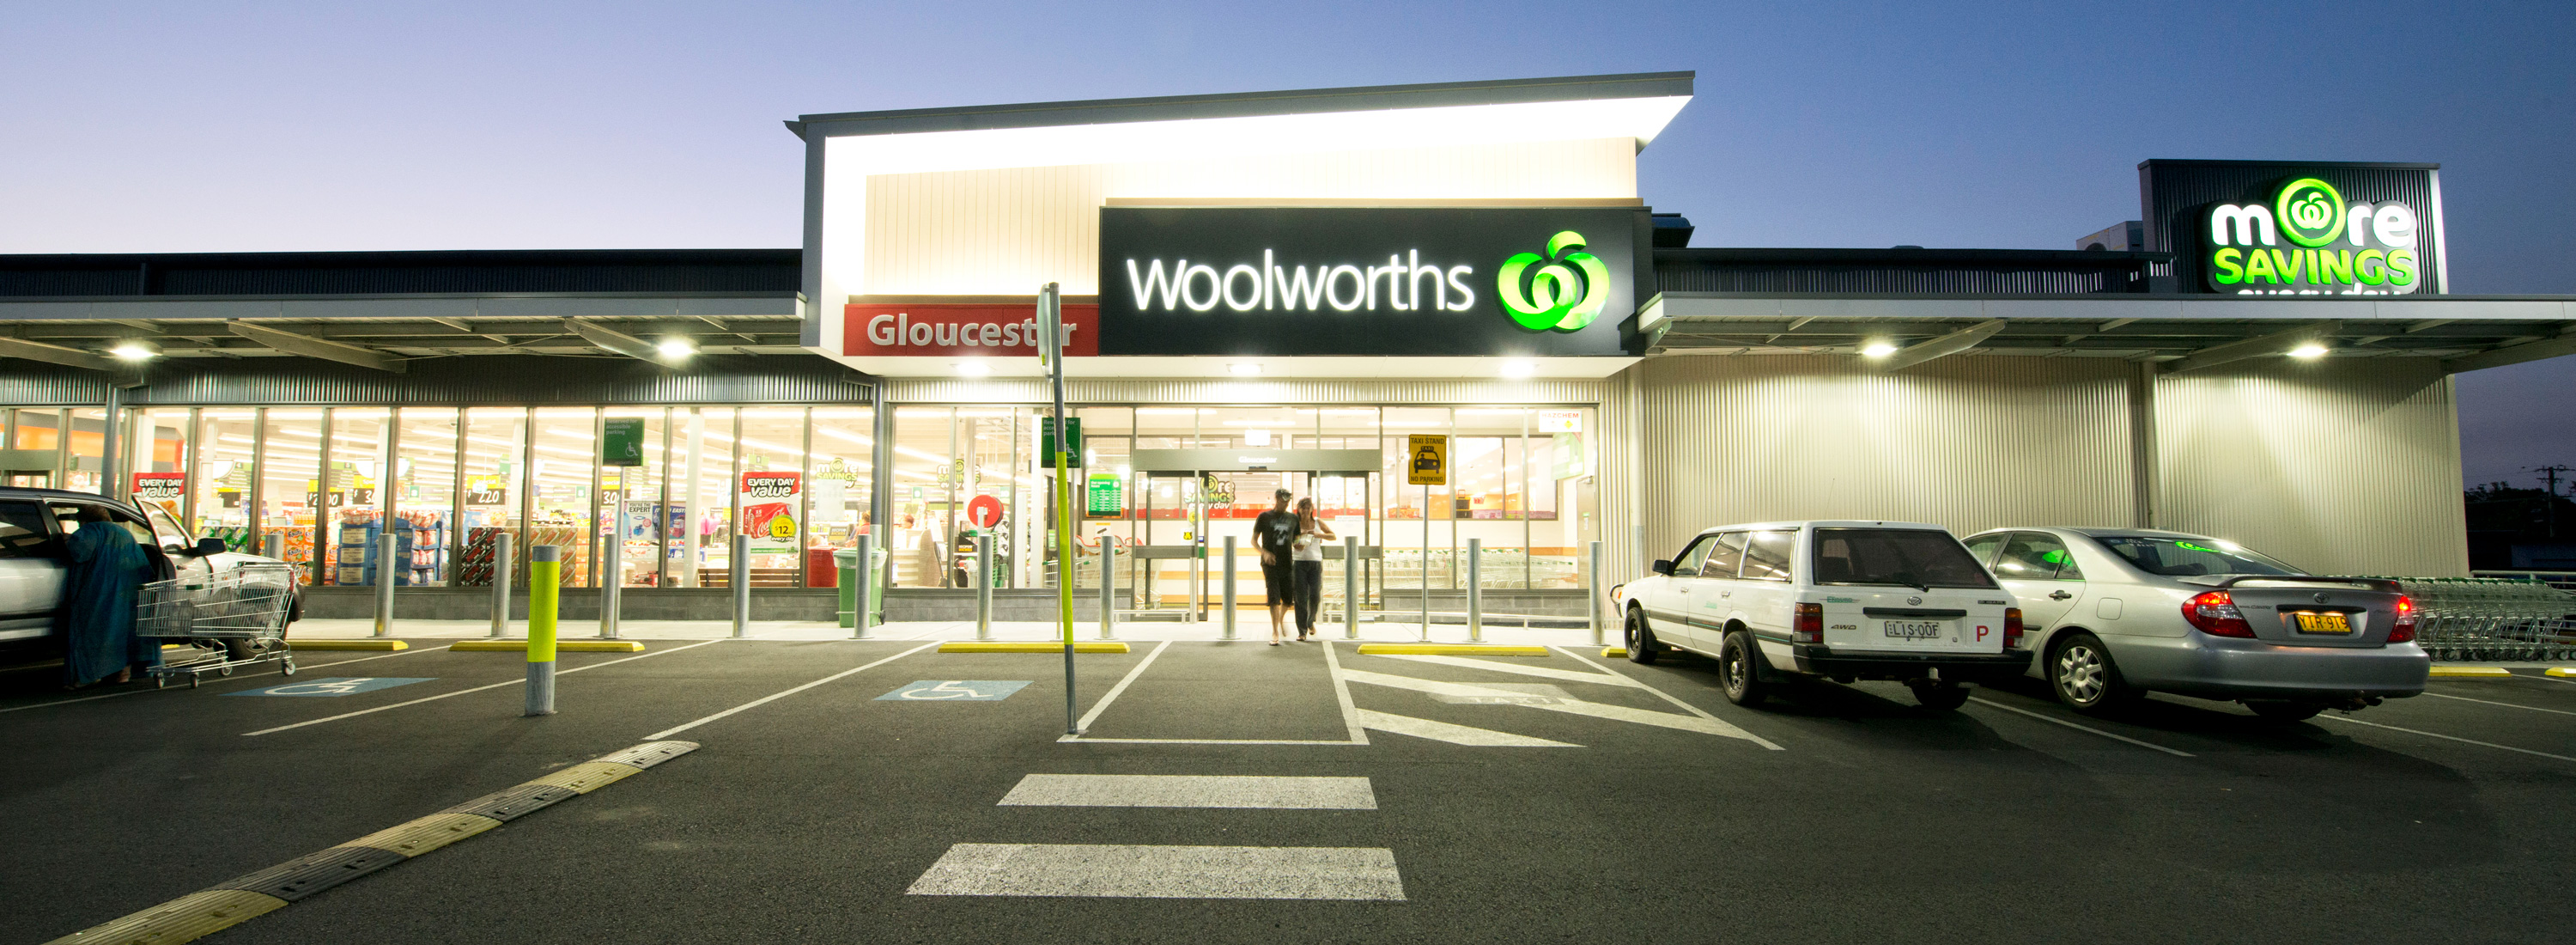 Woolworths Gloucester